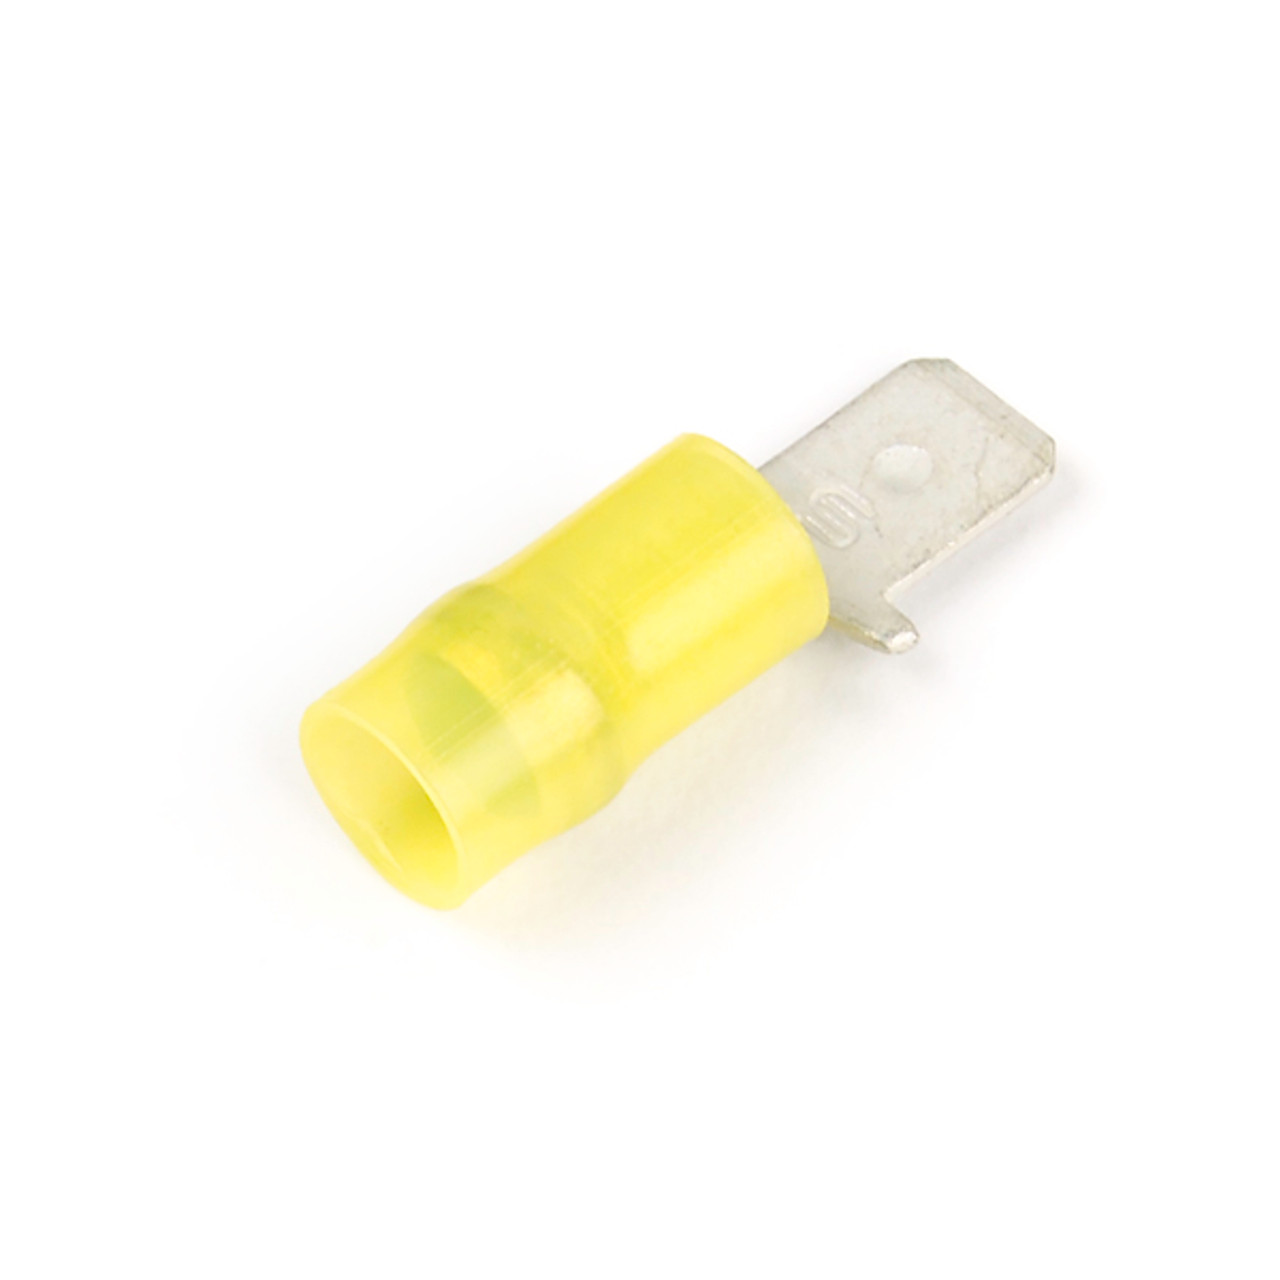 12 - 10 AWG Nylon Quick Disconnects Male .250" @ 15 Pack - Yellow  84-2226